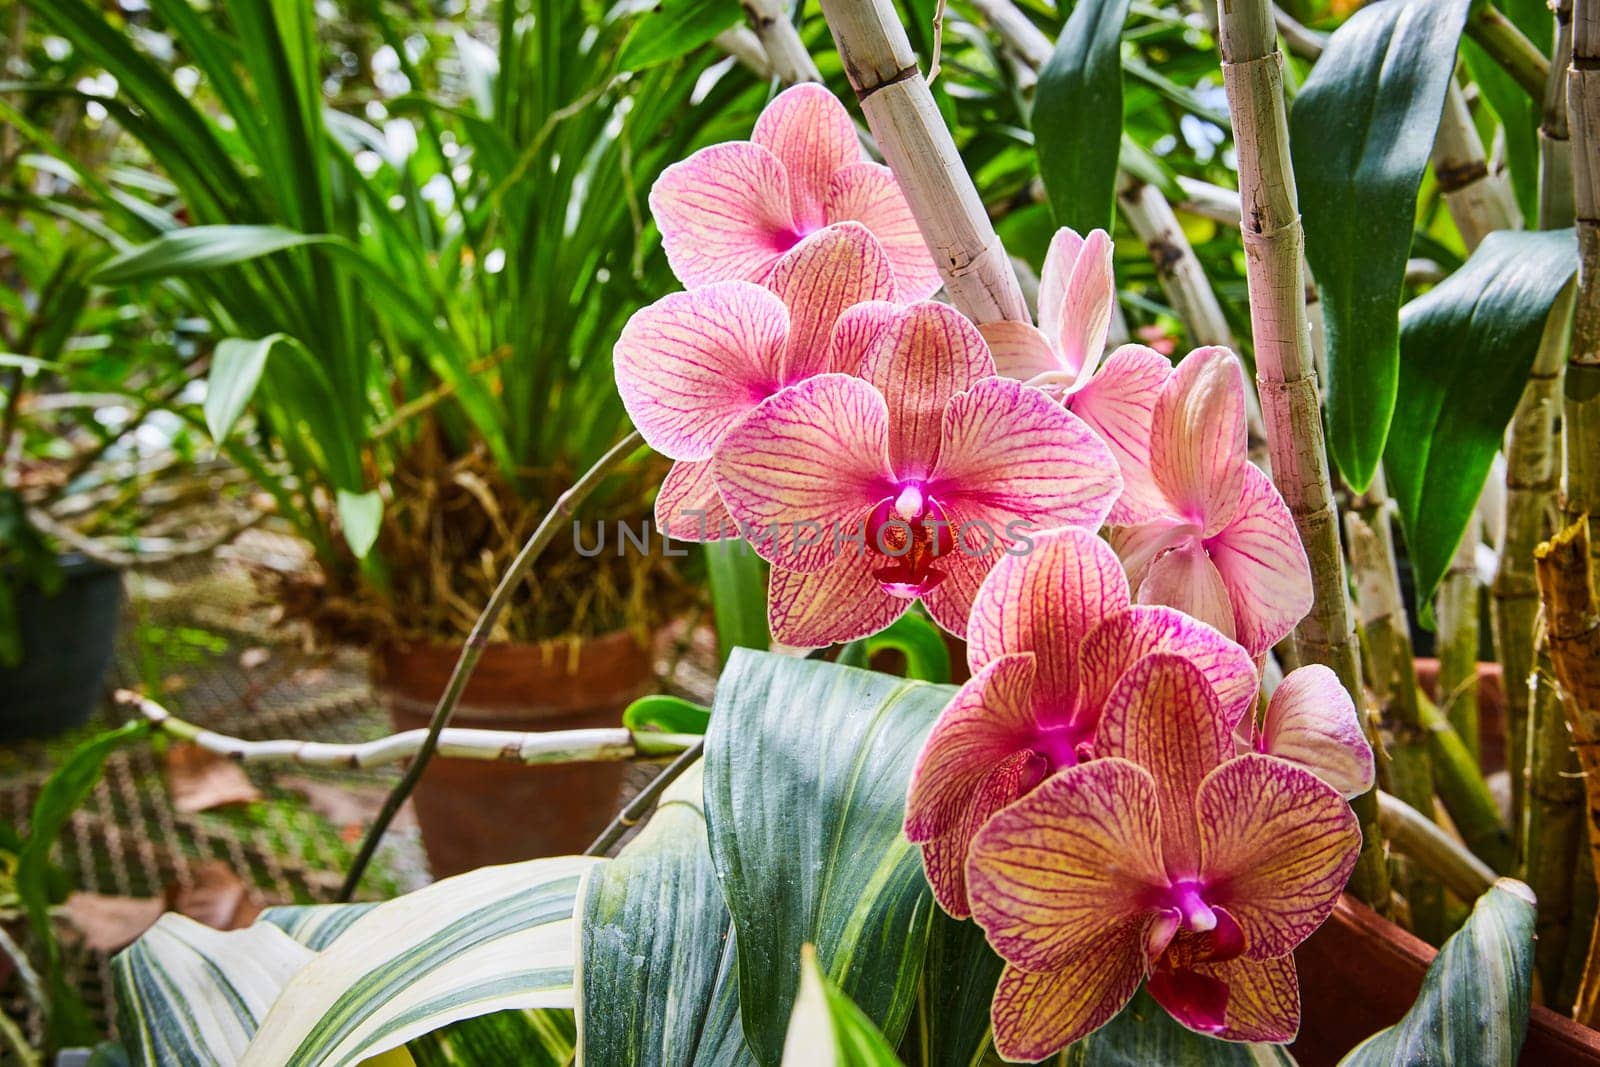 Vibrant Pink Orchids in Greenhouse Garden by njproductions